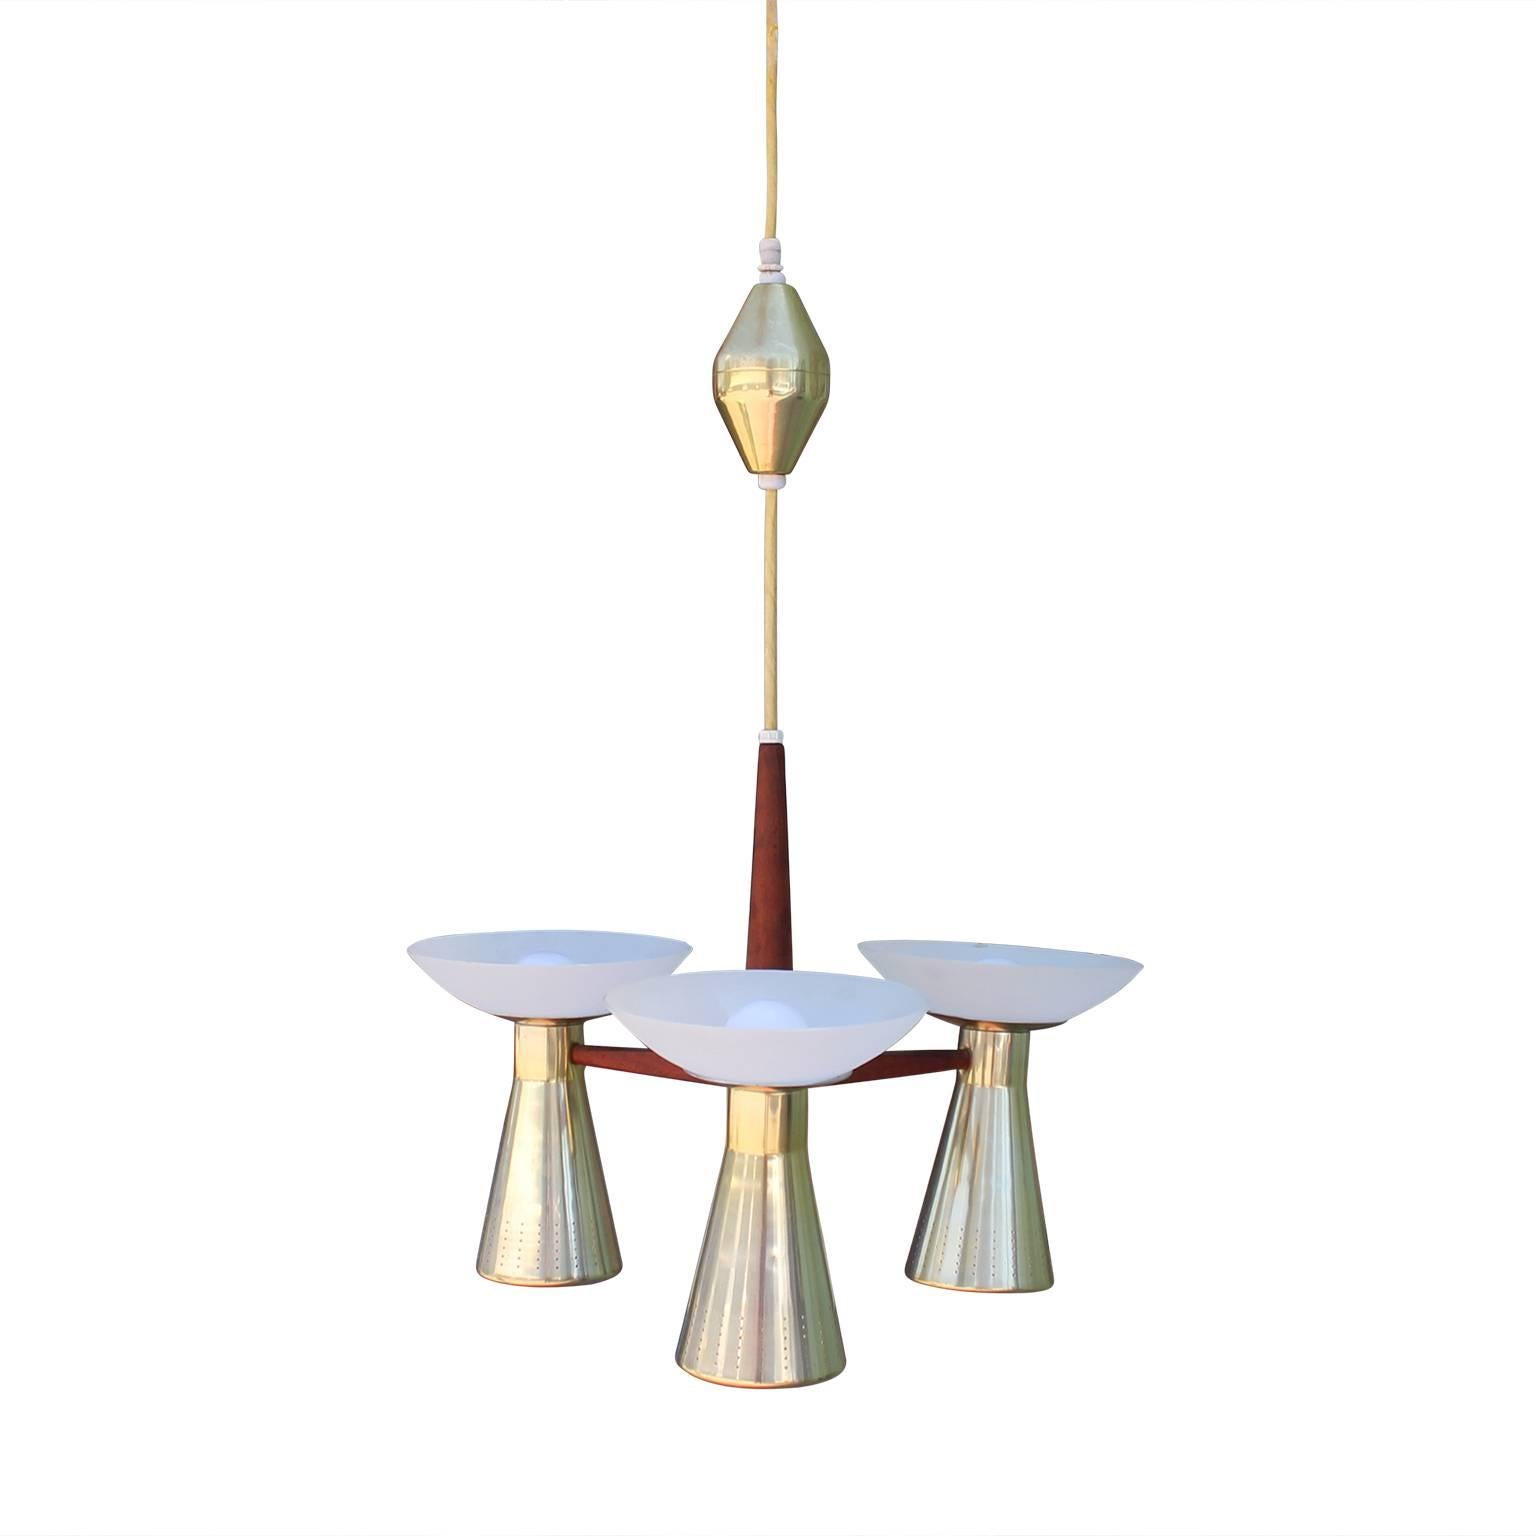 Gorgeous modernist brass and walnut chandelier featuring three double sconces (sockets on both the bottom and top). 

Measurements below are taken from the top of the accent ball, to the very bottom of the brass, and diameter taken from the